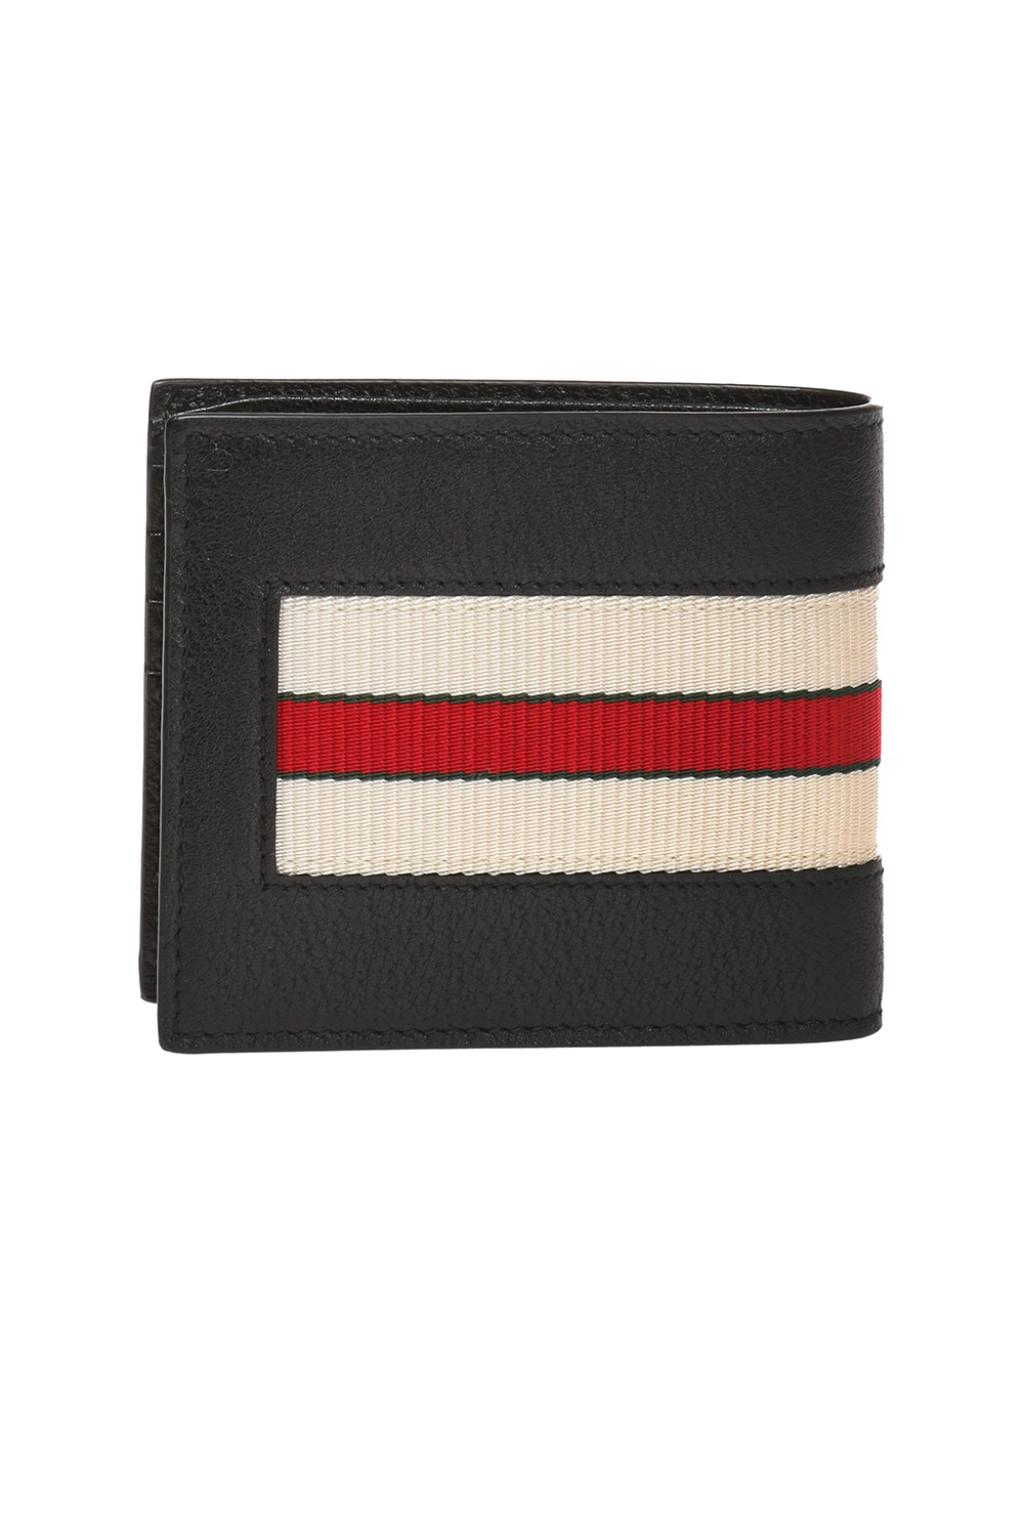 Gucci Unisex Black Leather Wallet with White Red Web Script Logo 408827  1094